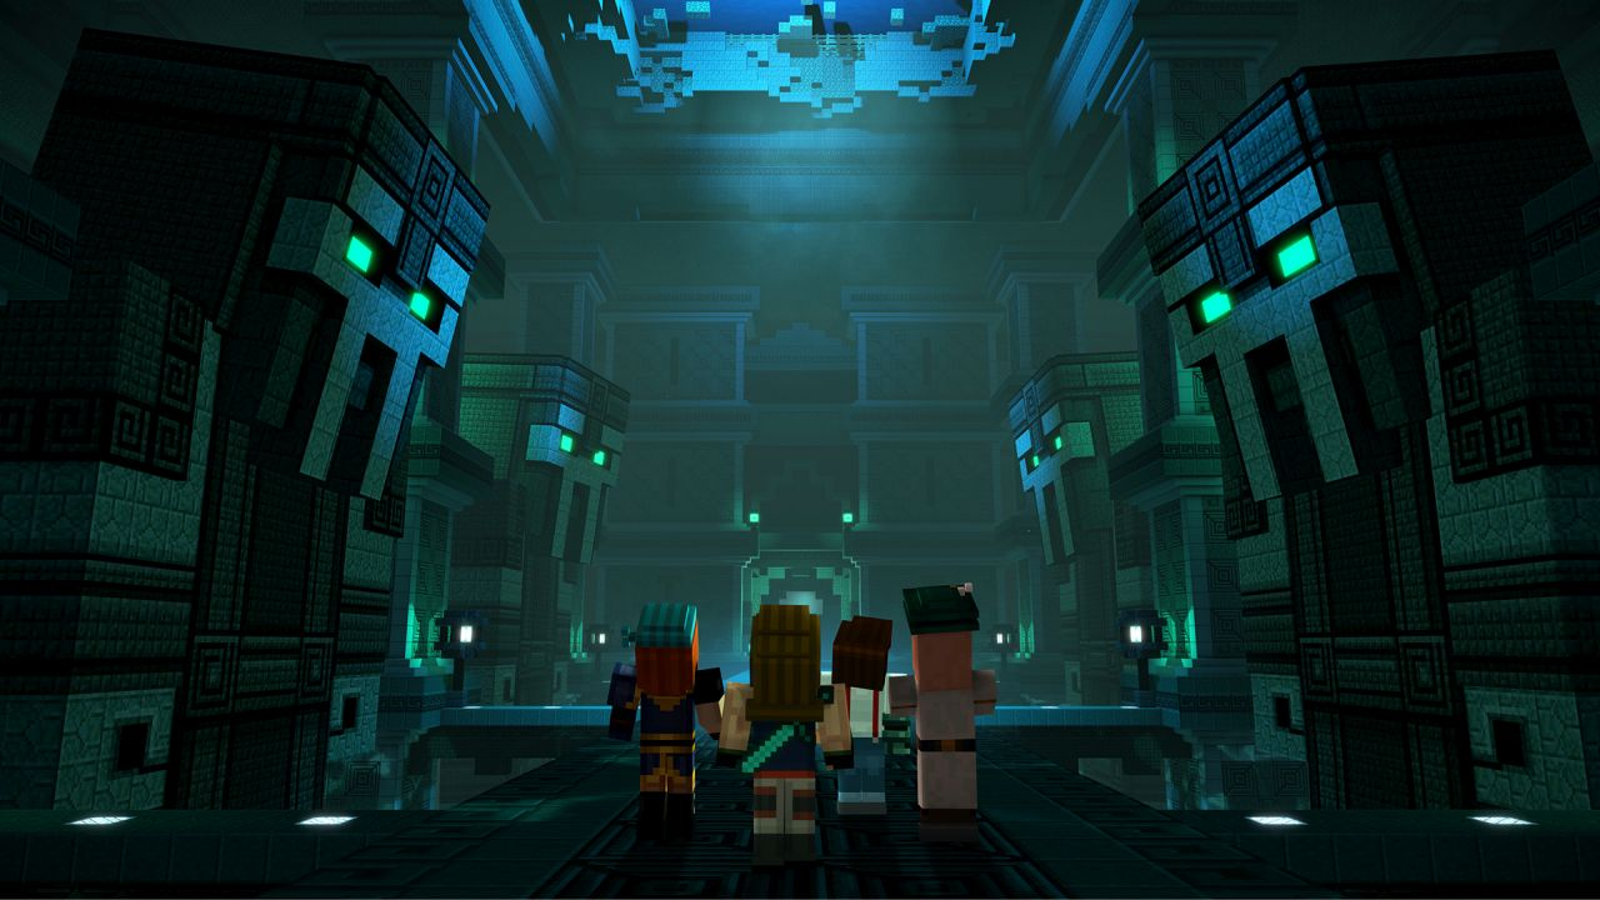 Minecraft: Story Mode delisted on Steam, leaving GOG.com on May